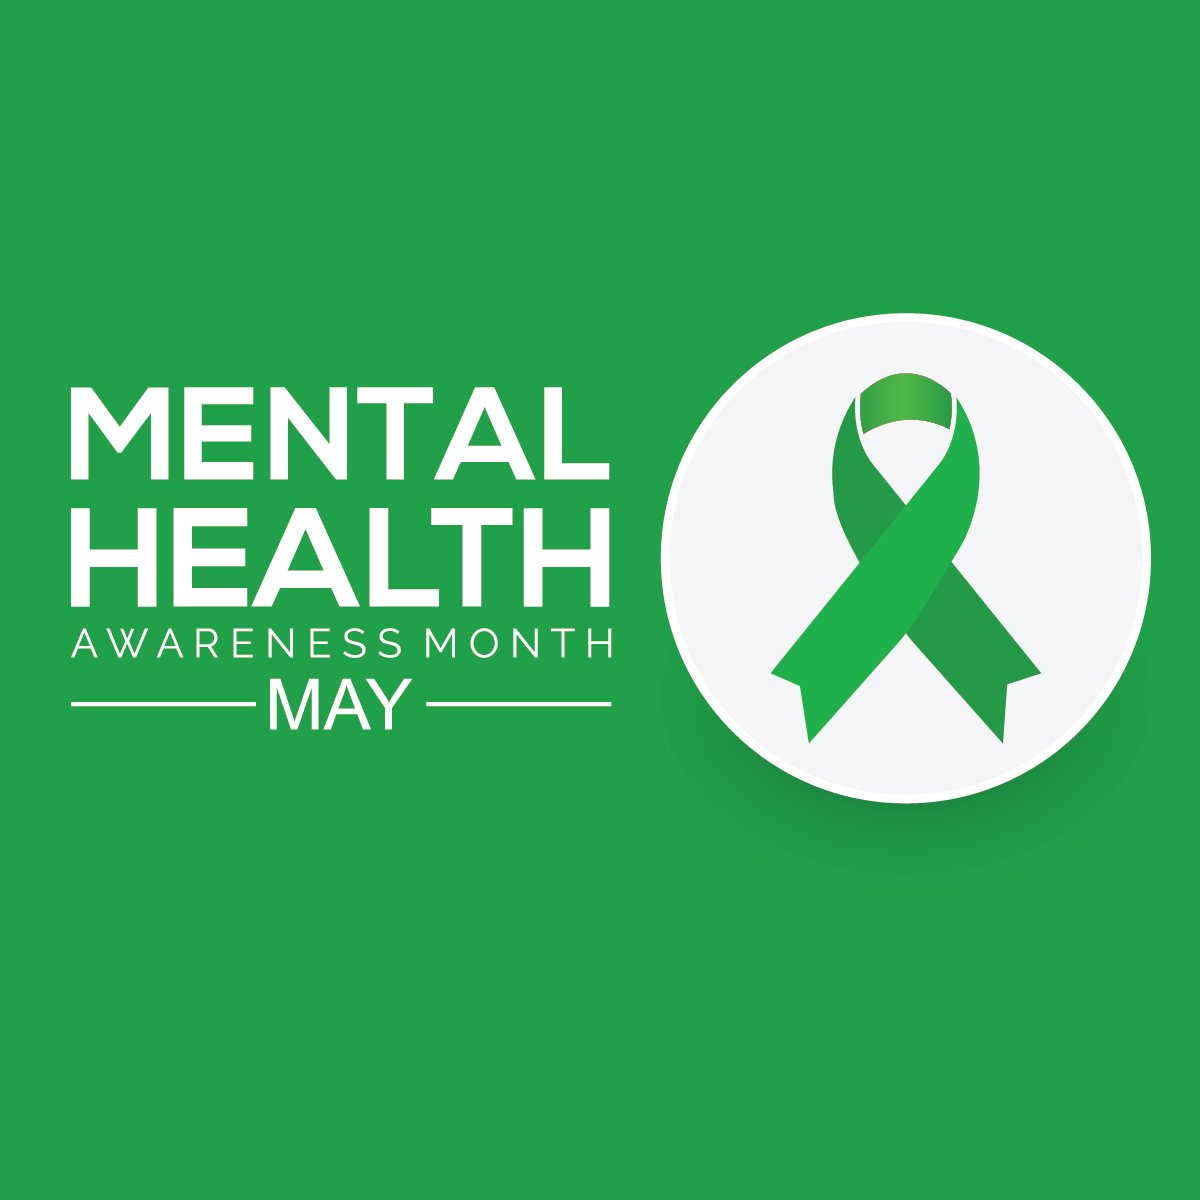 May is Mental Health Awareness Month. I'm proud of the work the Georgia Senate accomplished this year to address the mental health crisis for children and veterans, and I will continue to prioritize efforts to improve mental health care. #gapol